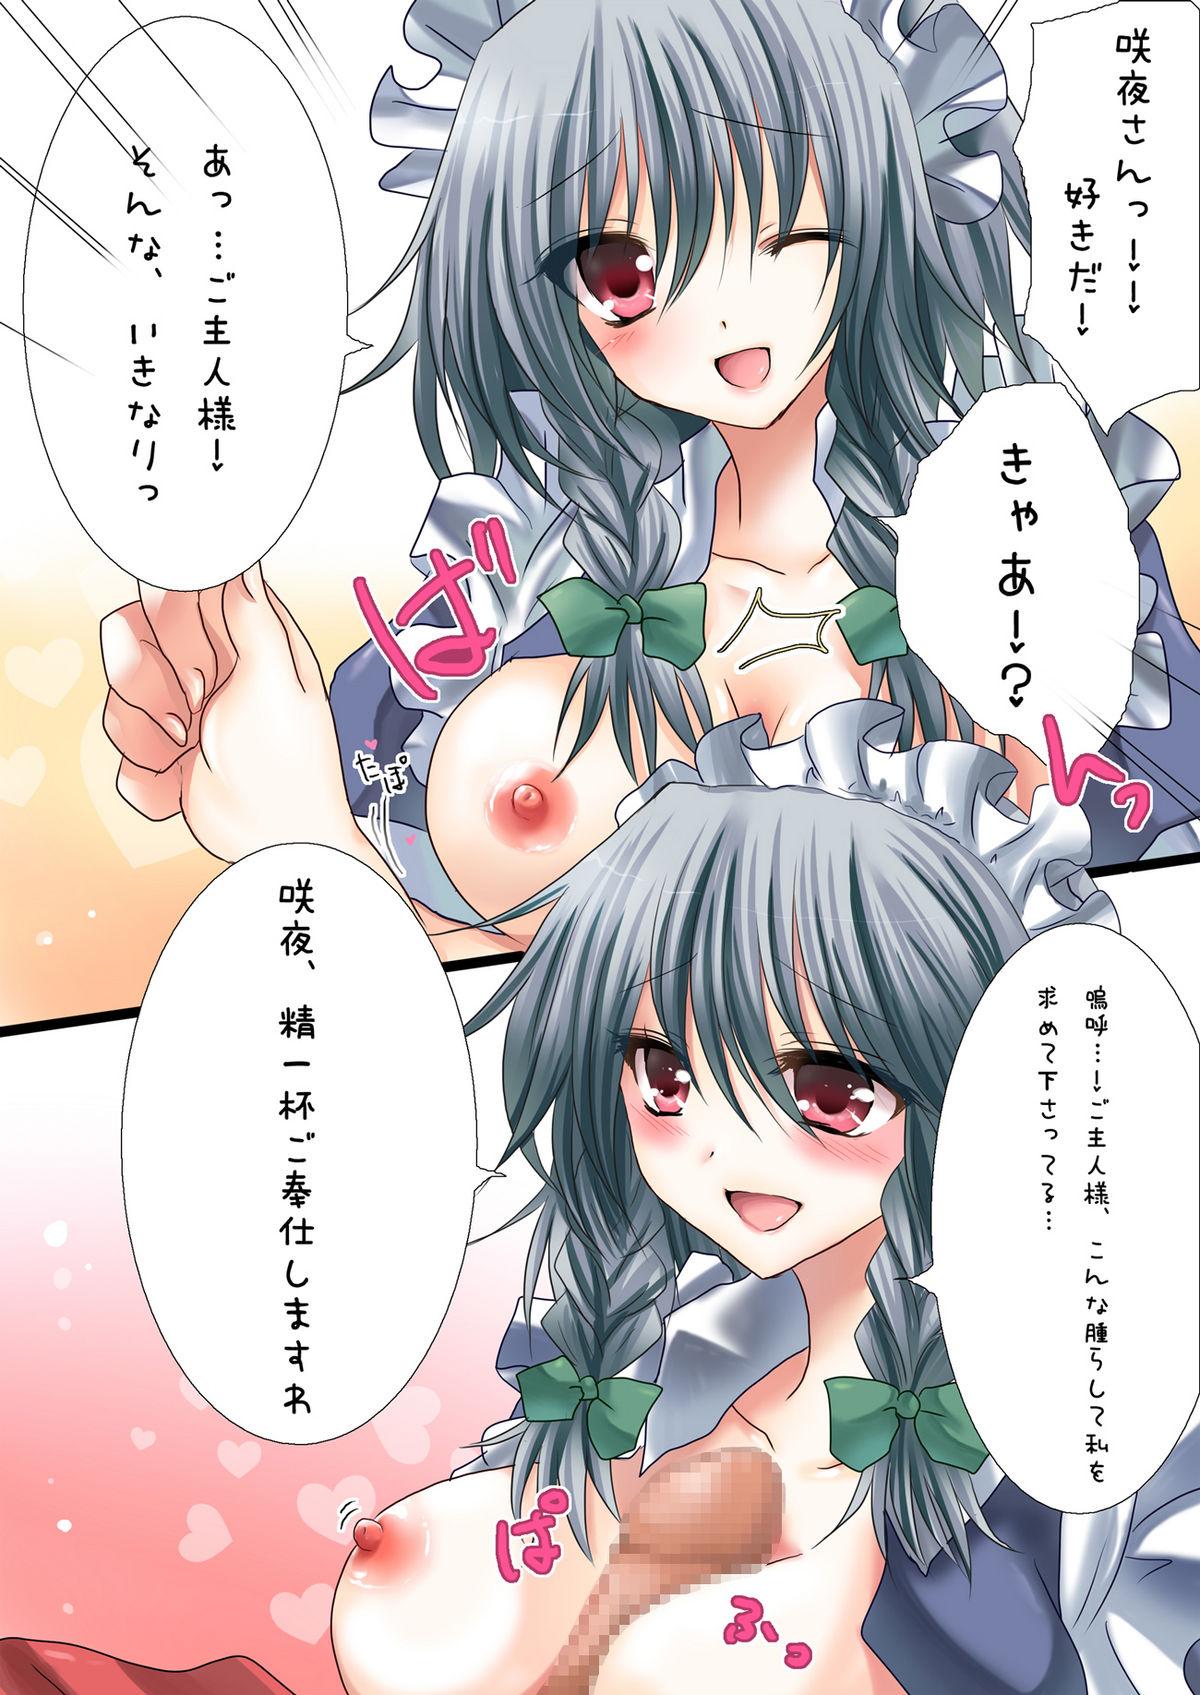 Gay Public Deredere Sakuya-san - Touhou project Sapphicerotica - Page 2